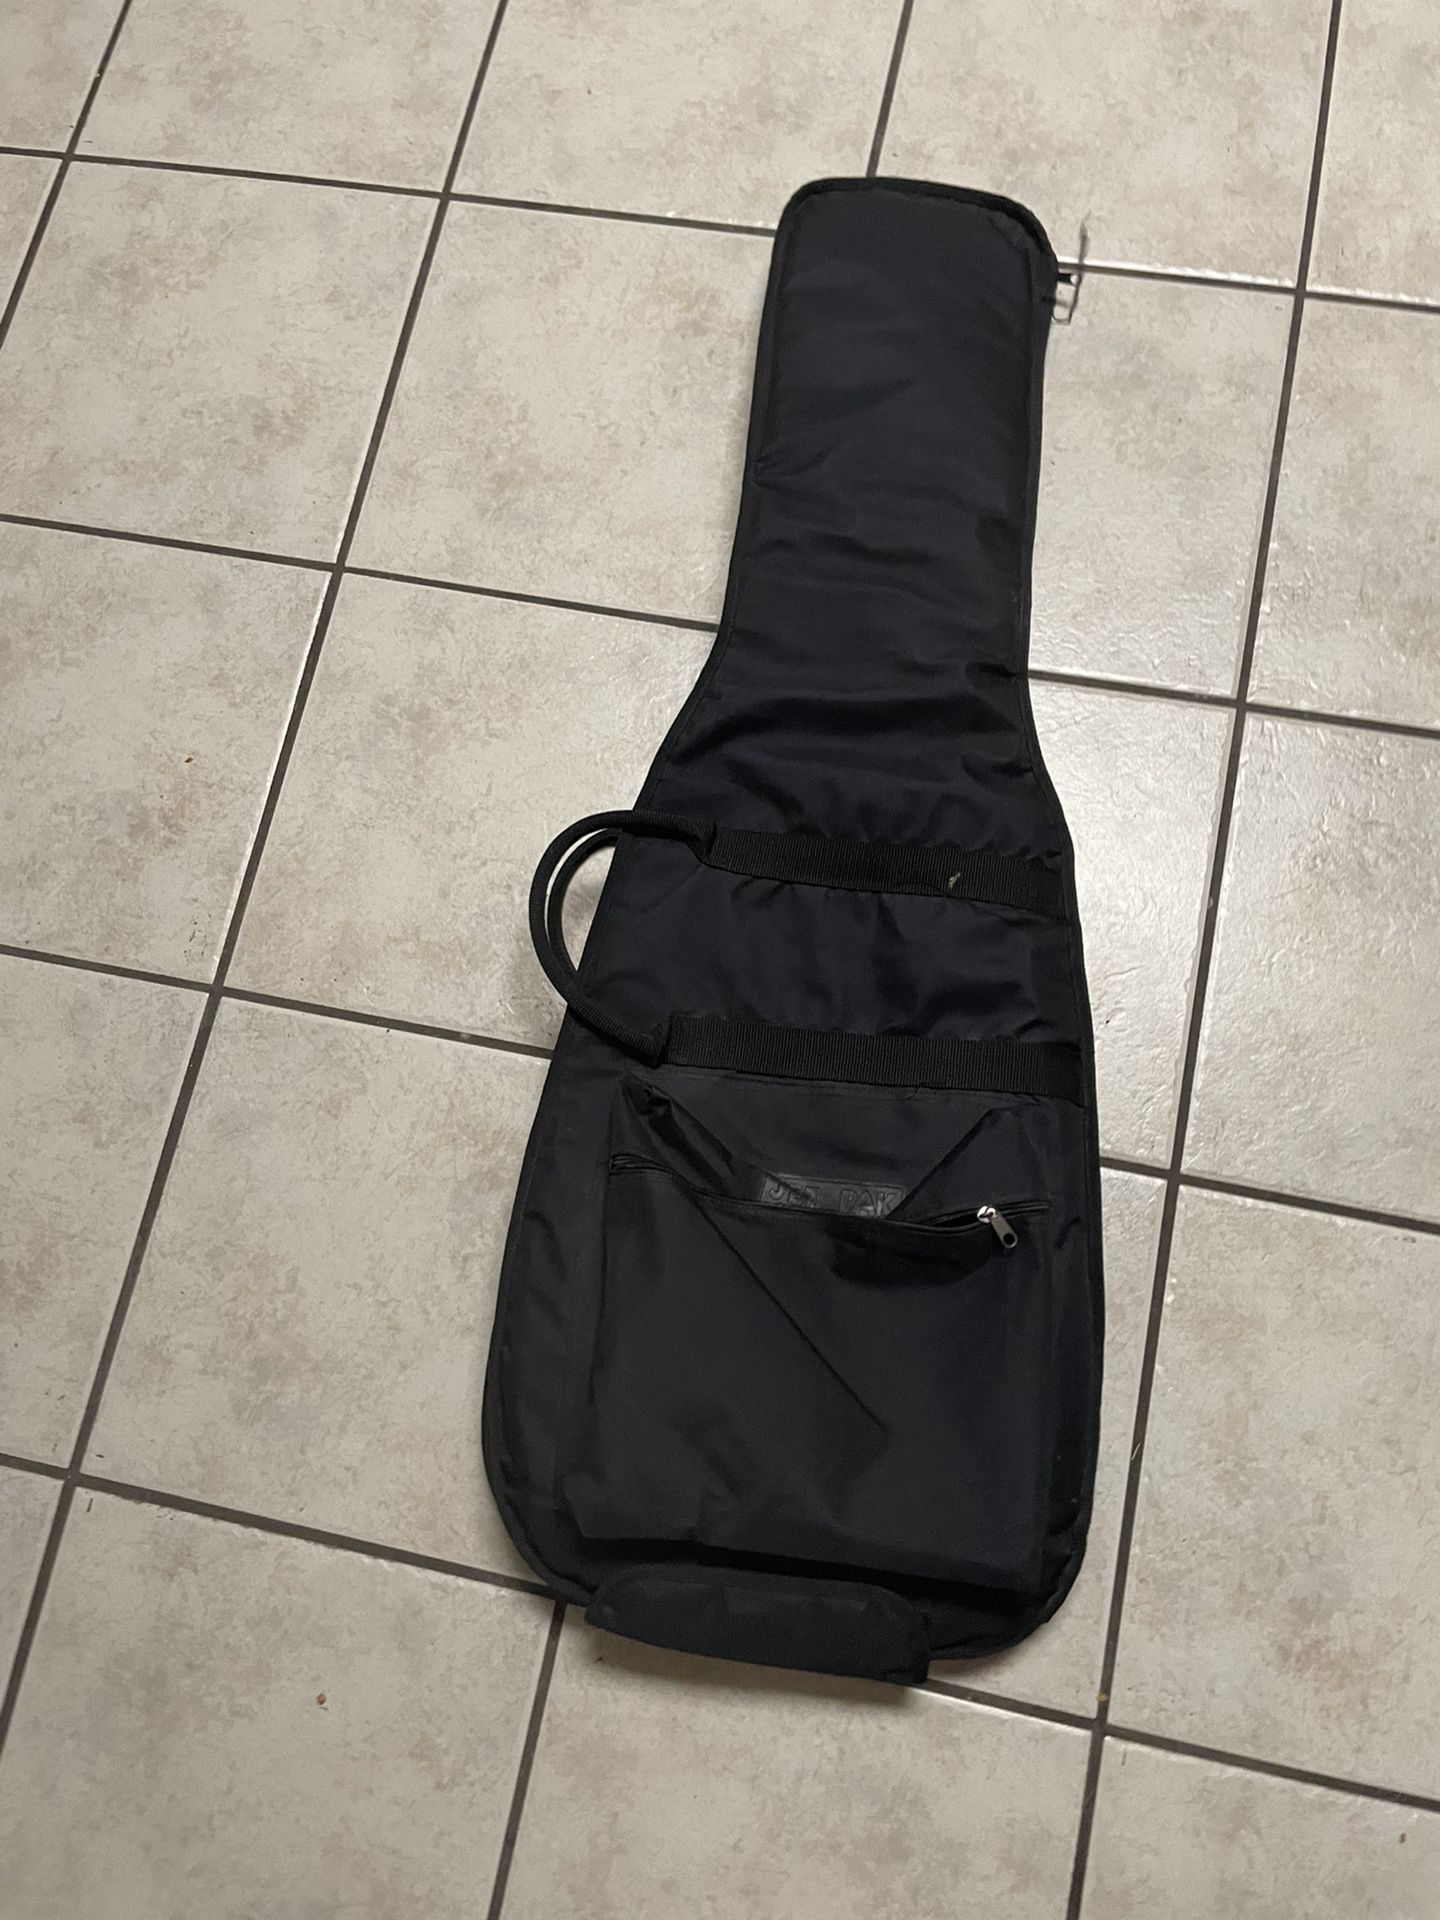 2 Padded Gig Bags For Solid Body Electric Guitars